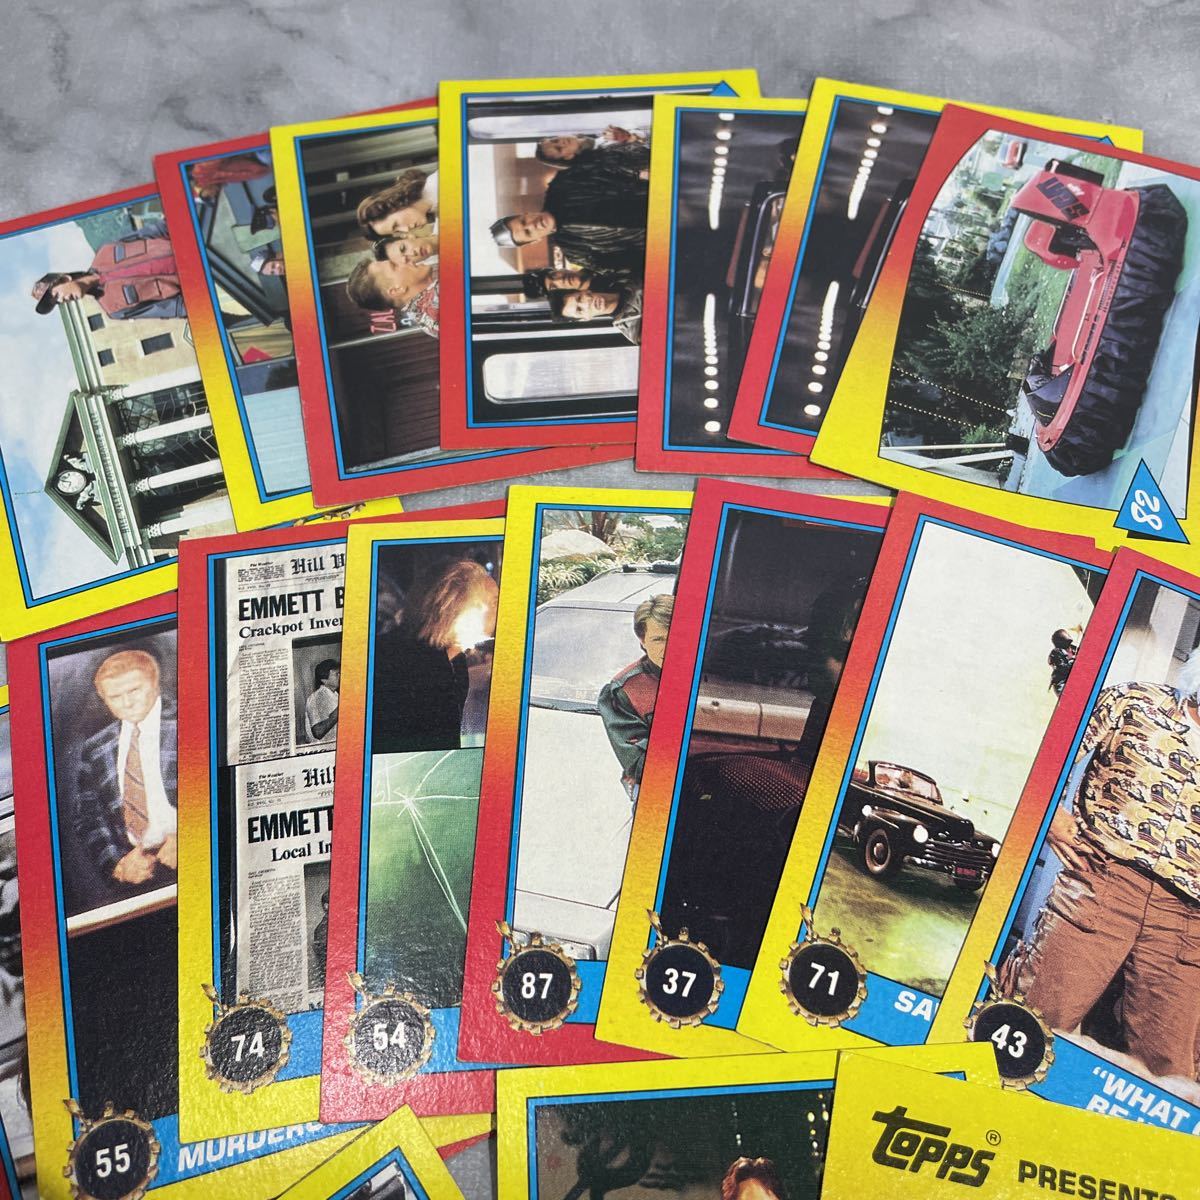  that time thing back *tu* The * Future Ⅱ card BACK TO THE FUTURE TRILOGY Ⅱ Movie card 1989 year 18 sheets set sale 